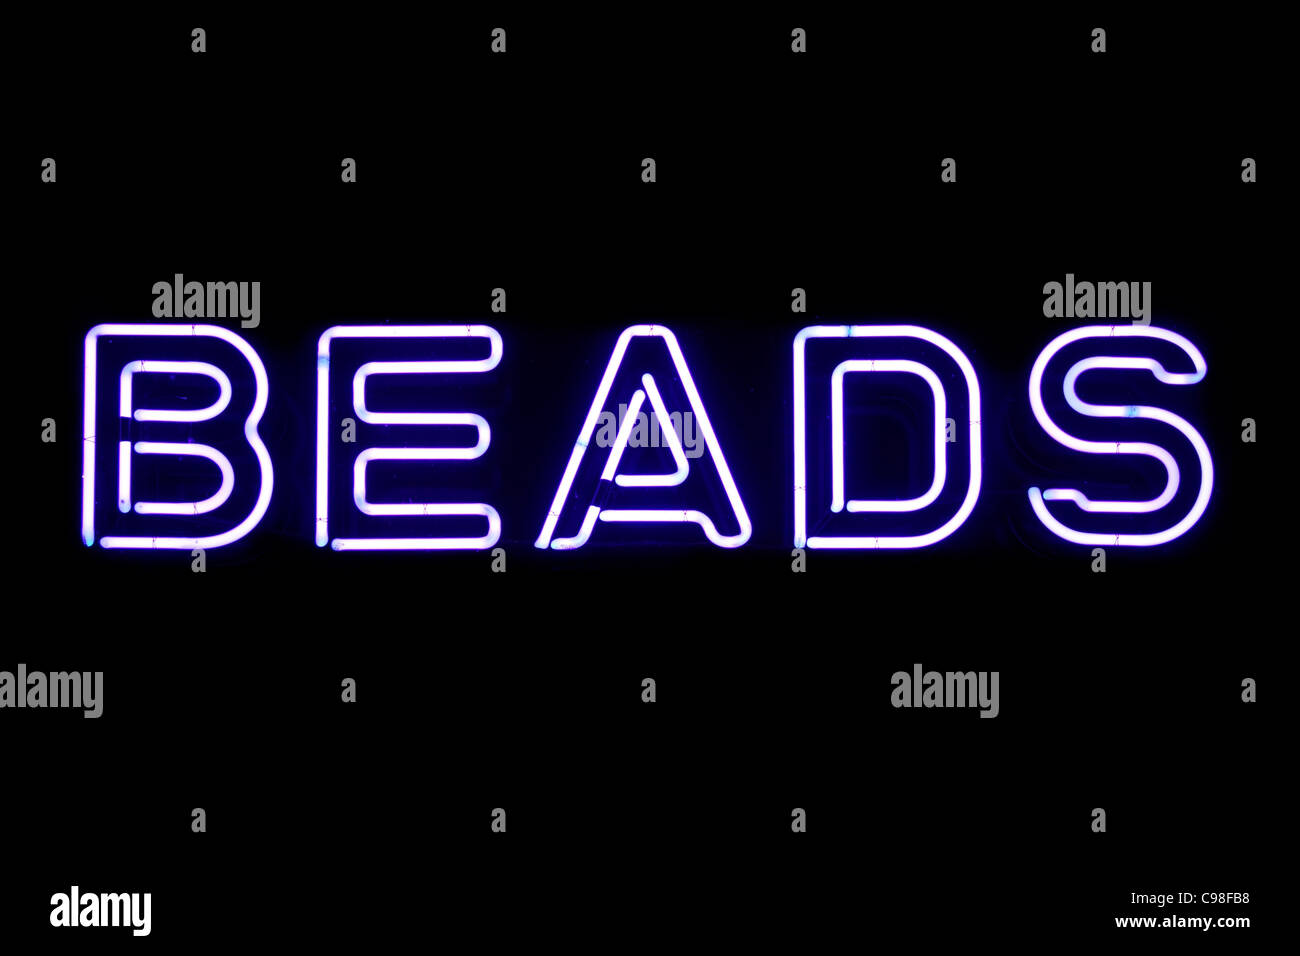 Purple beads neon sign isolated on black background Stock Photo